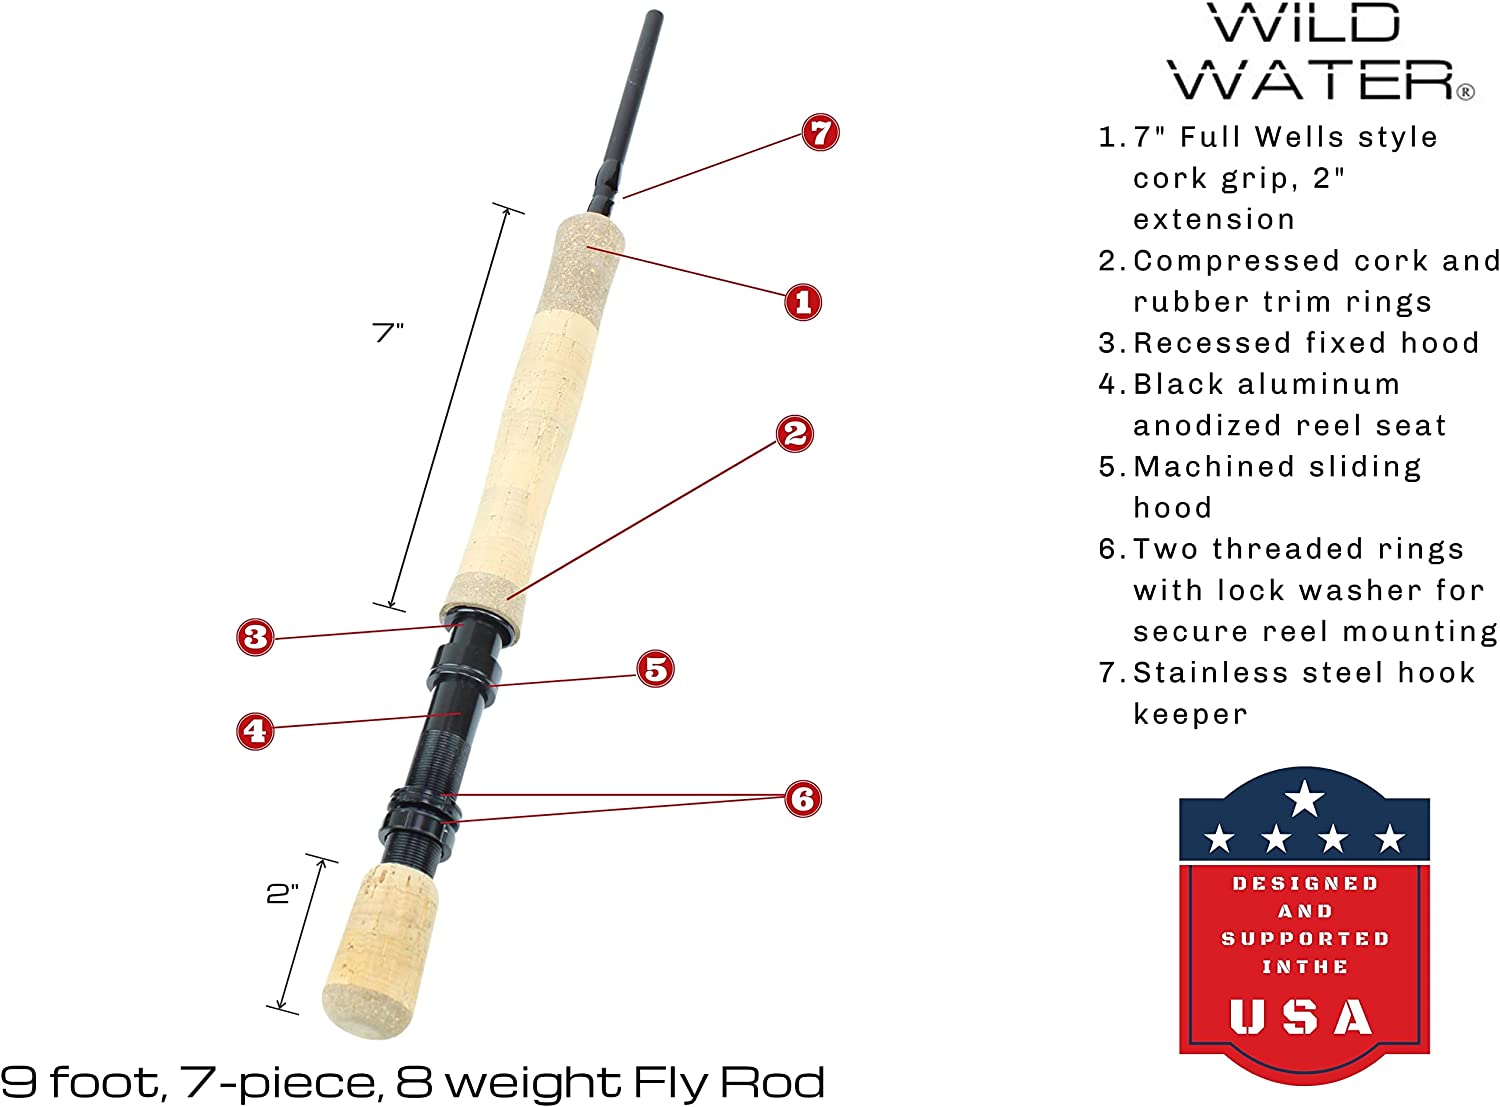 Wild Water Deluxe Saltwater Fly Fishing Kit, 9 ft 8 wt 7 Piece Rod